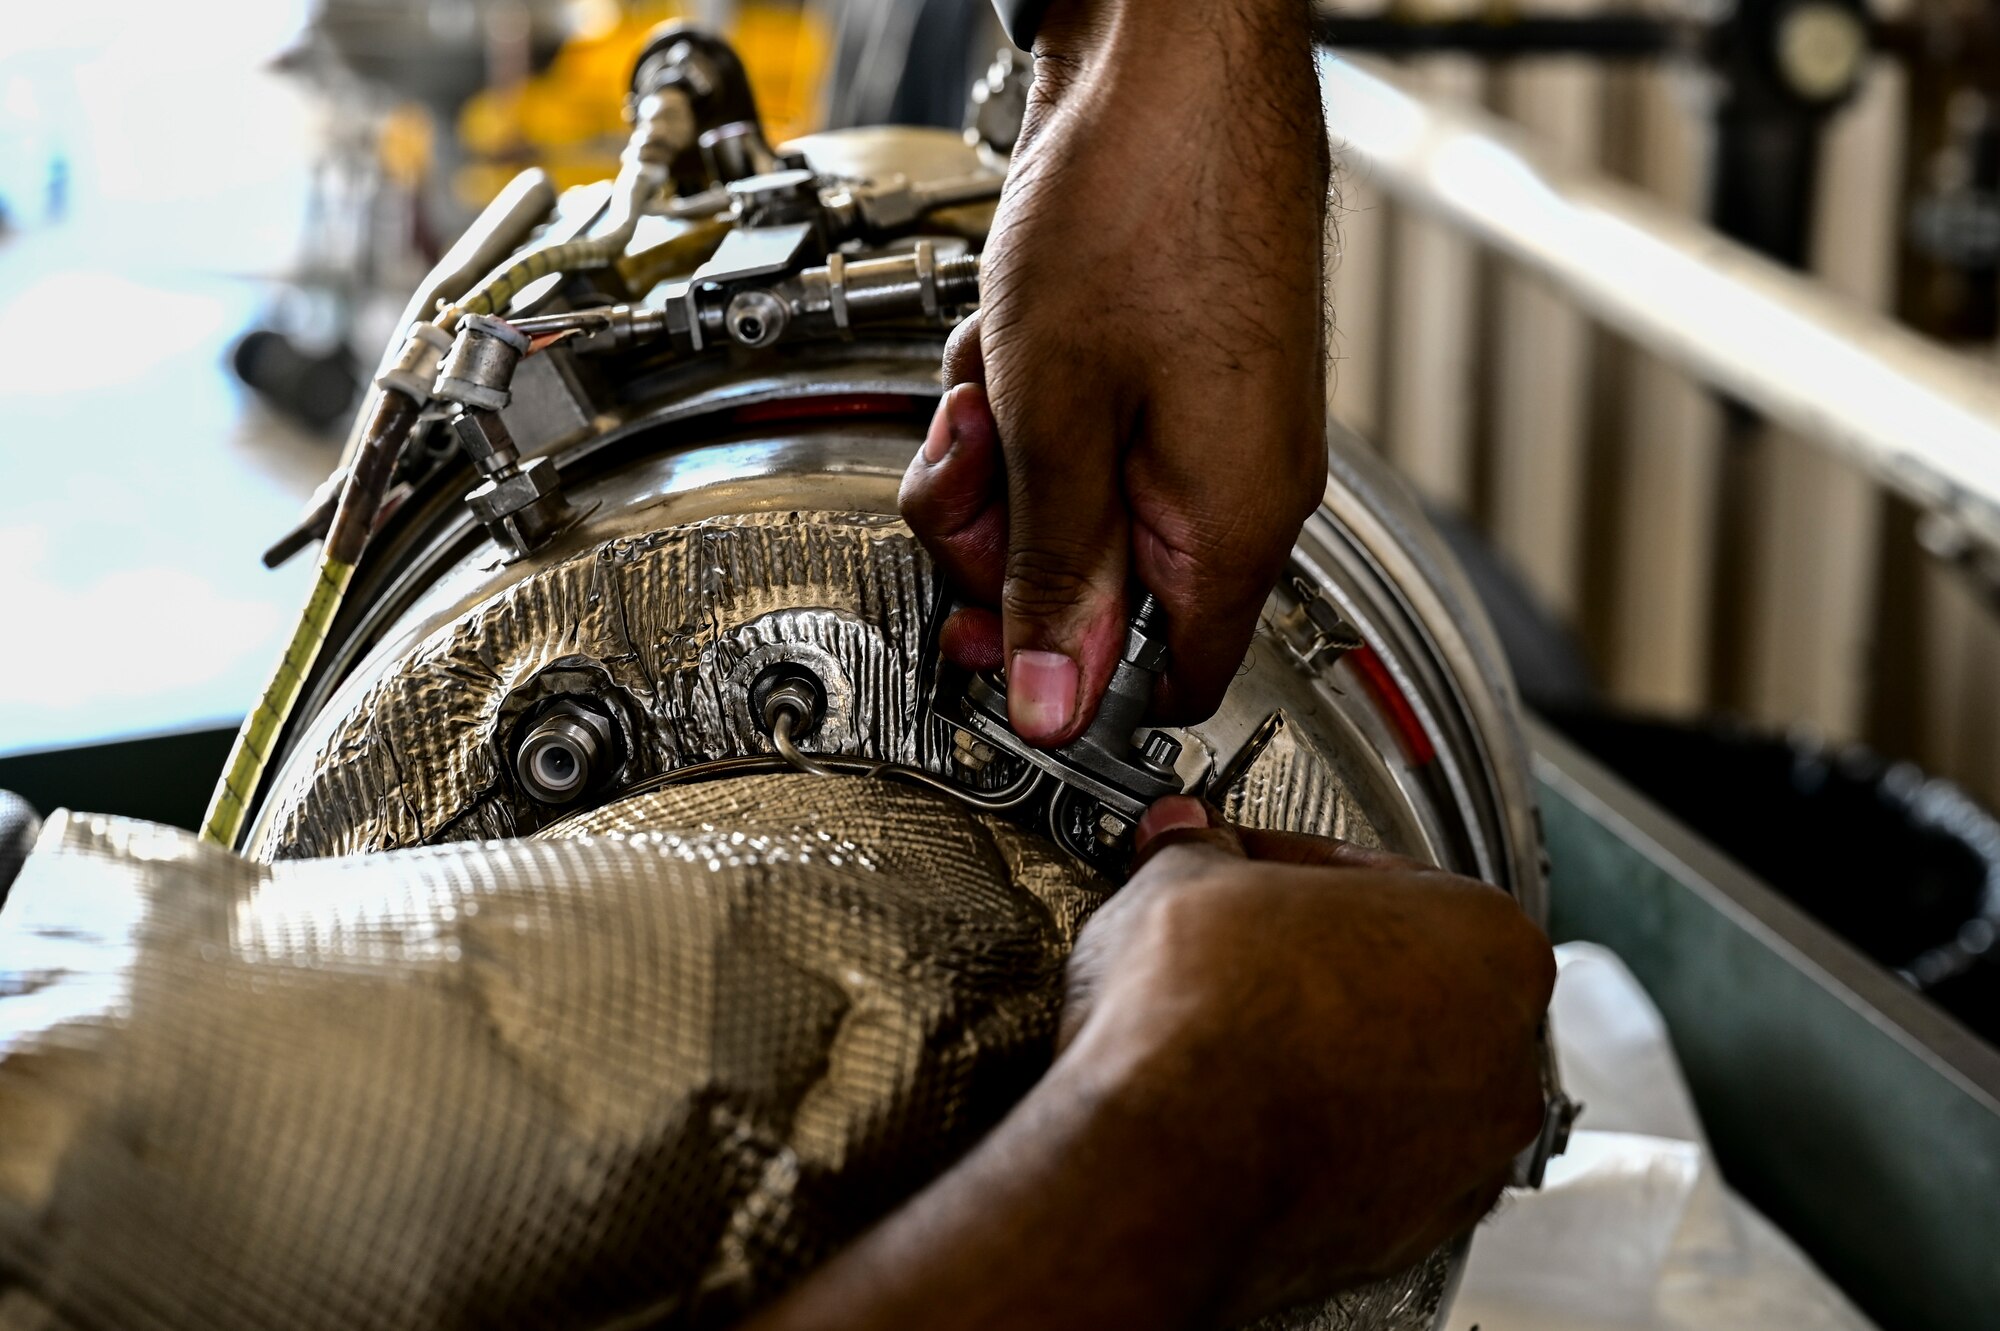 An Airman from the 849th Aircraft Maintenance Squadron performs maintenance on an F-16 Viper part at Holloman Air Force Base, New Mexico, June 27, 2023.